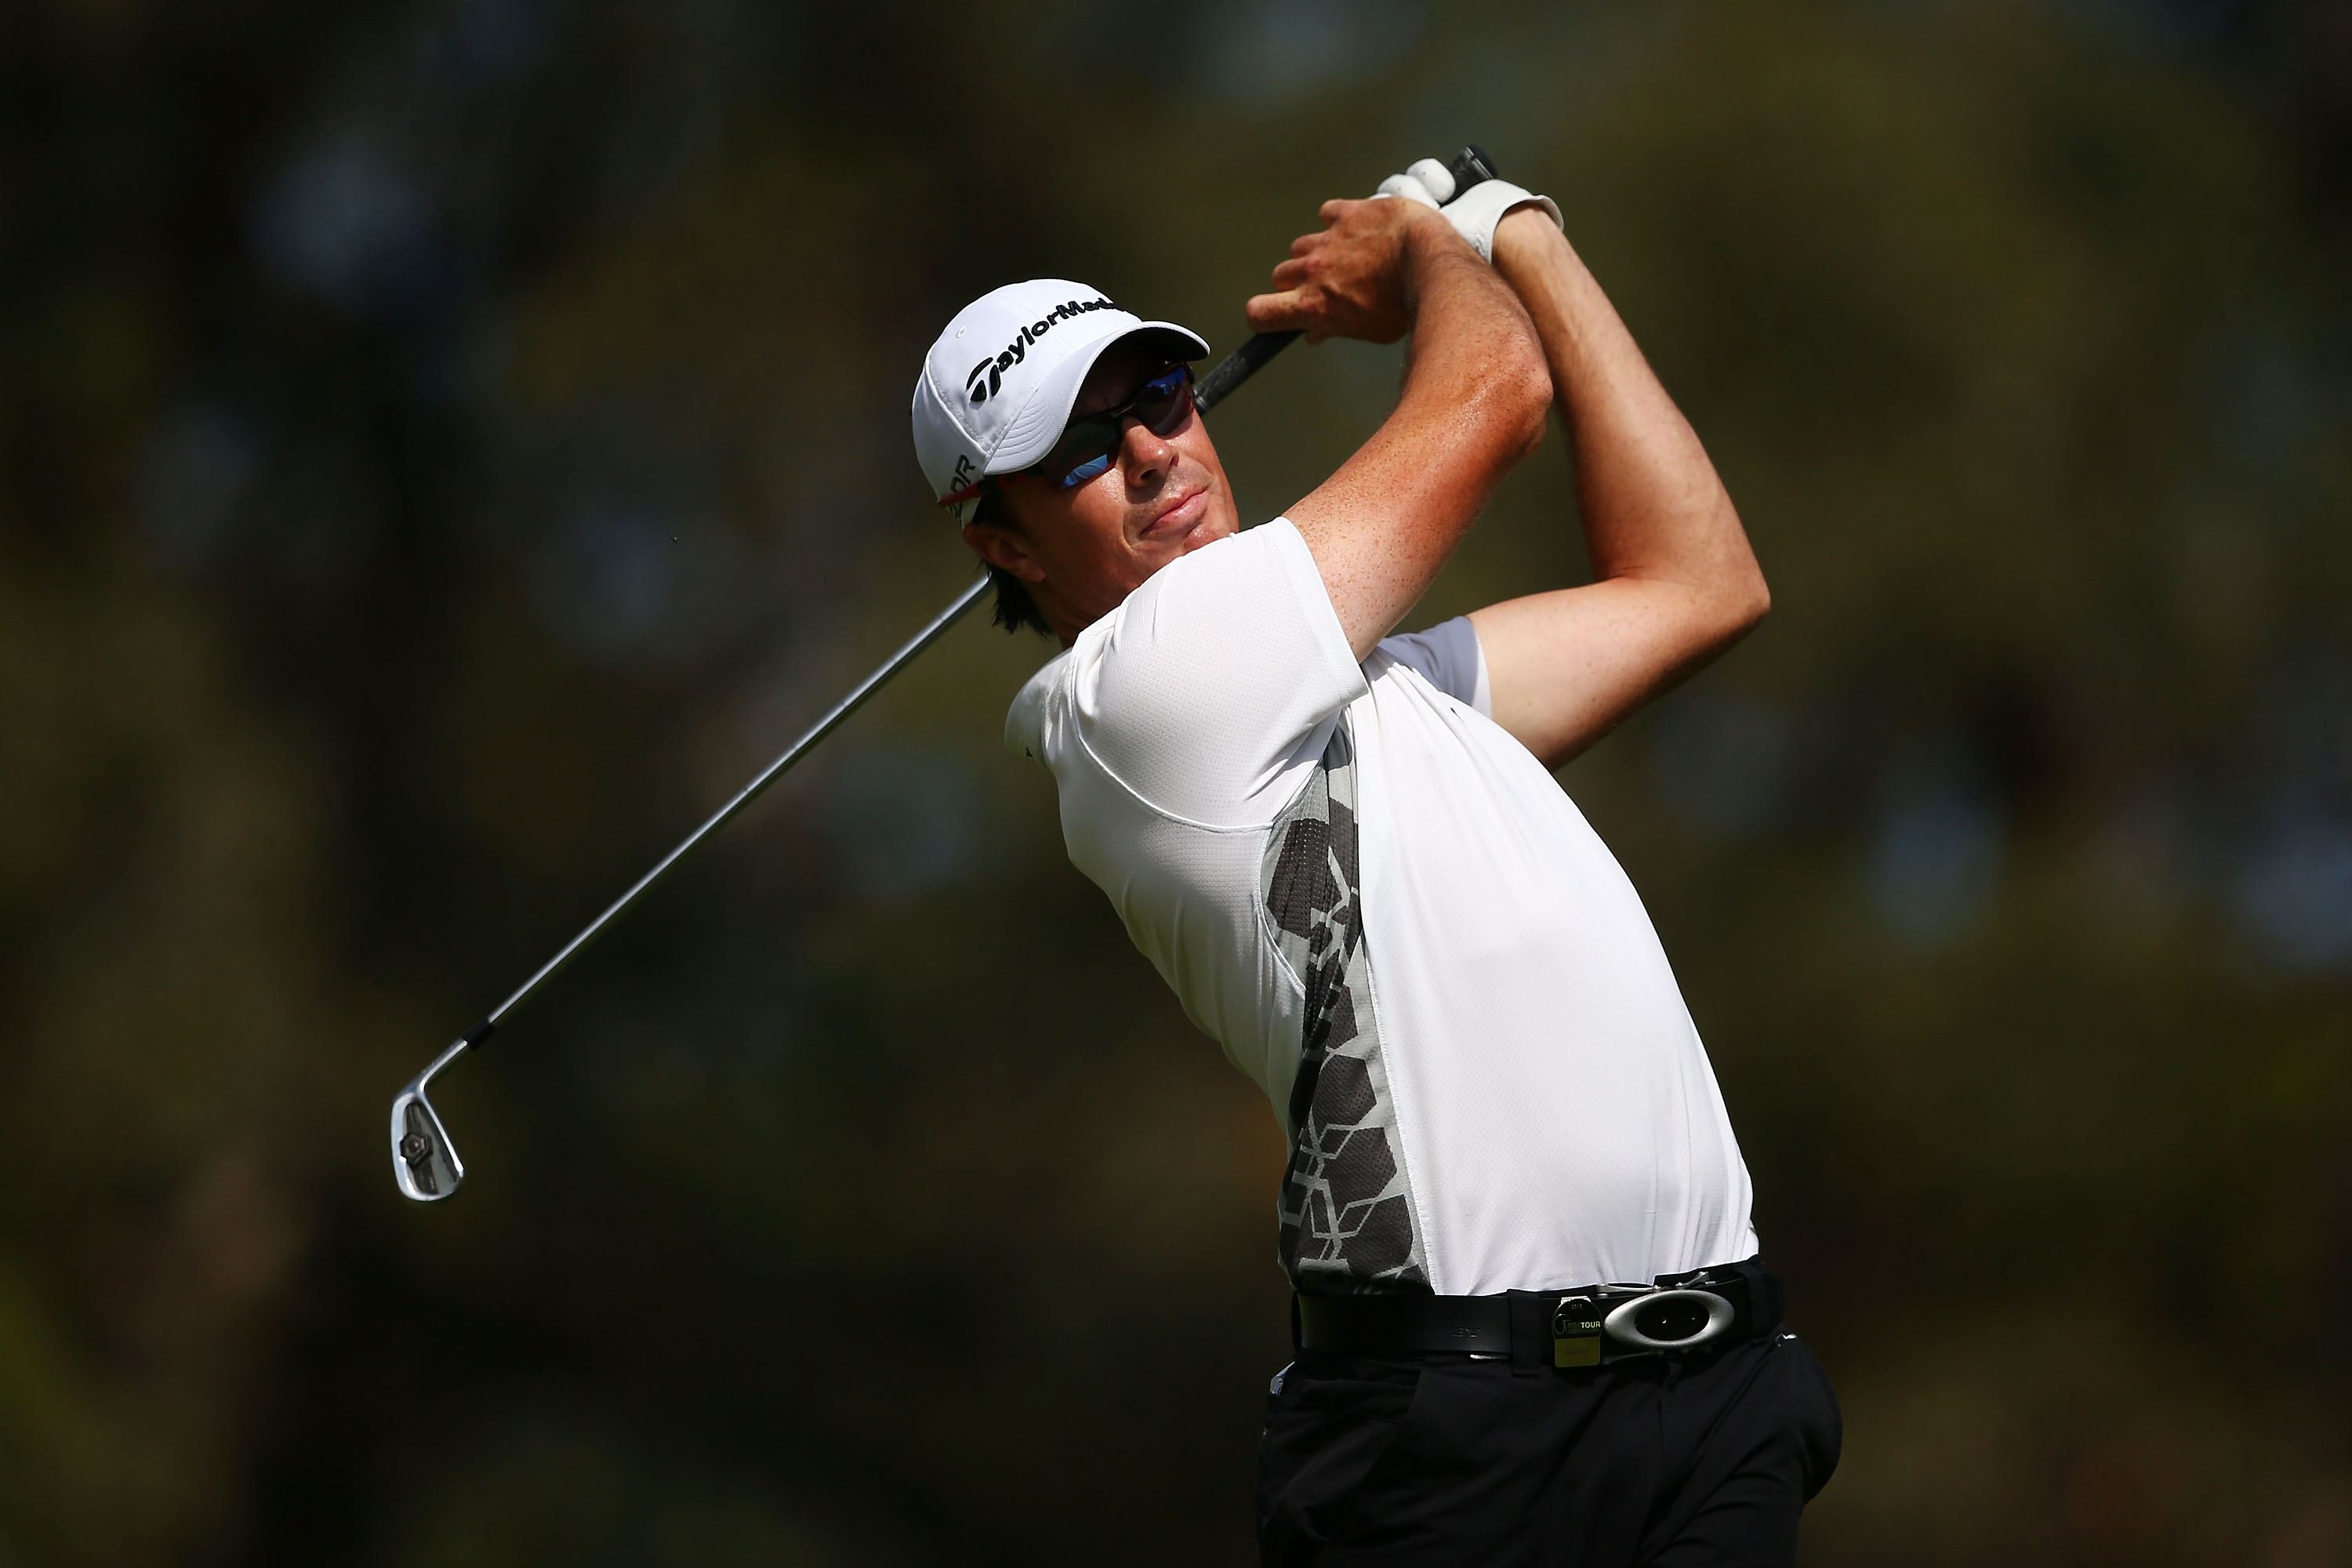 Clint is ranked 1188th in the world (Photo: Getty Images)